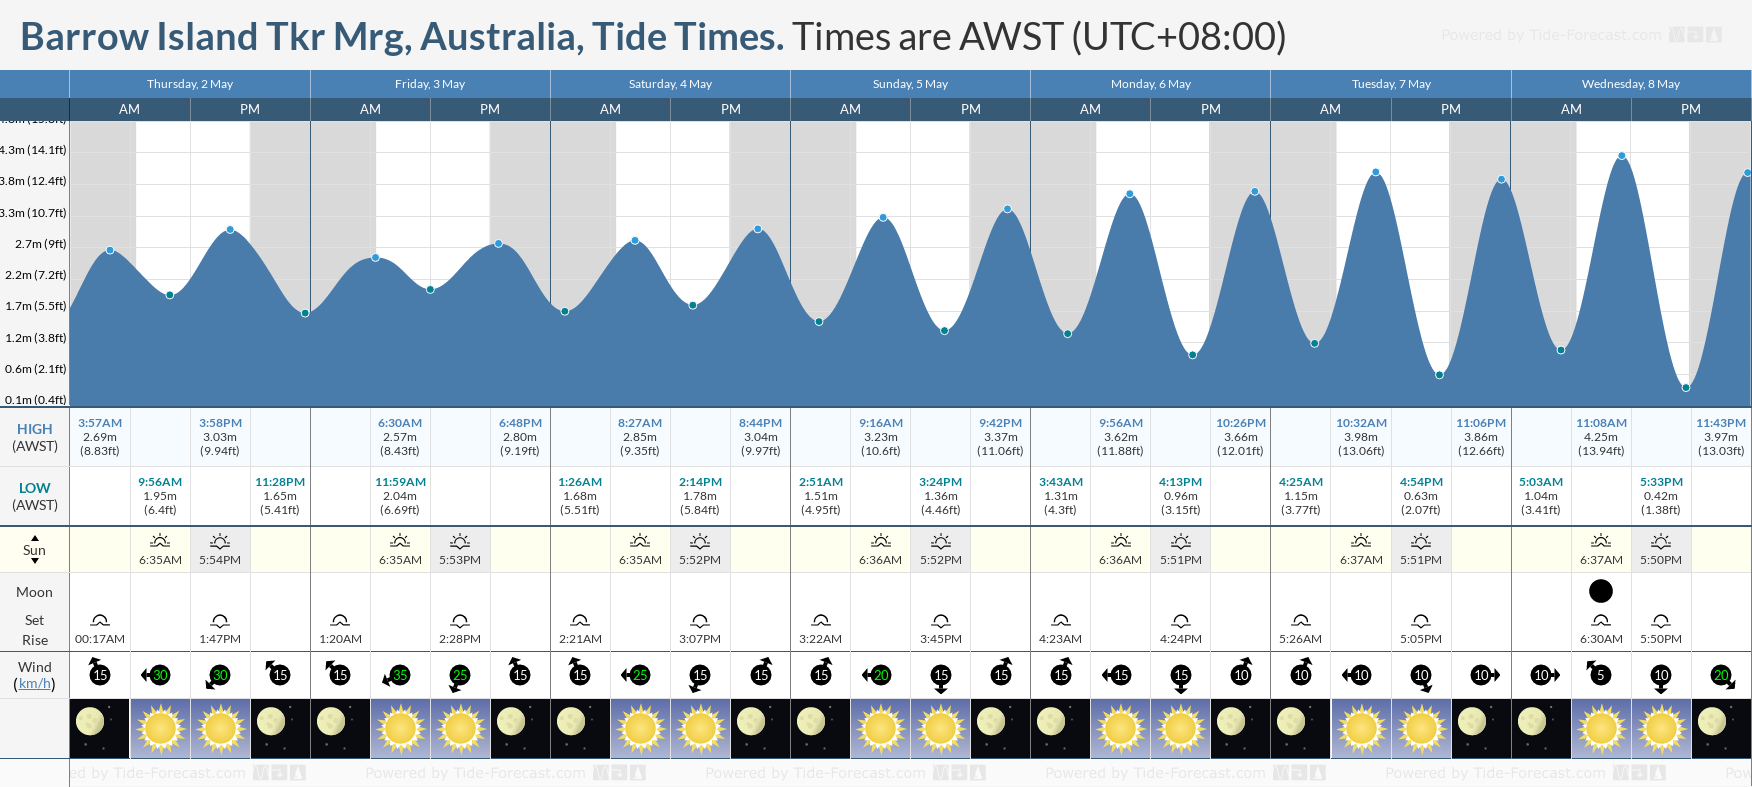 Barrow Island Tkr Mrg, Australia Tide Chart including high and low tide tide times for the next 7 days